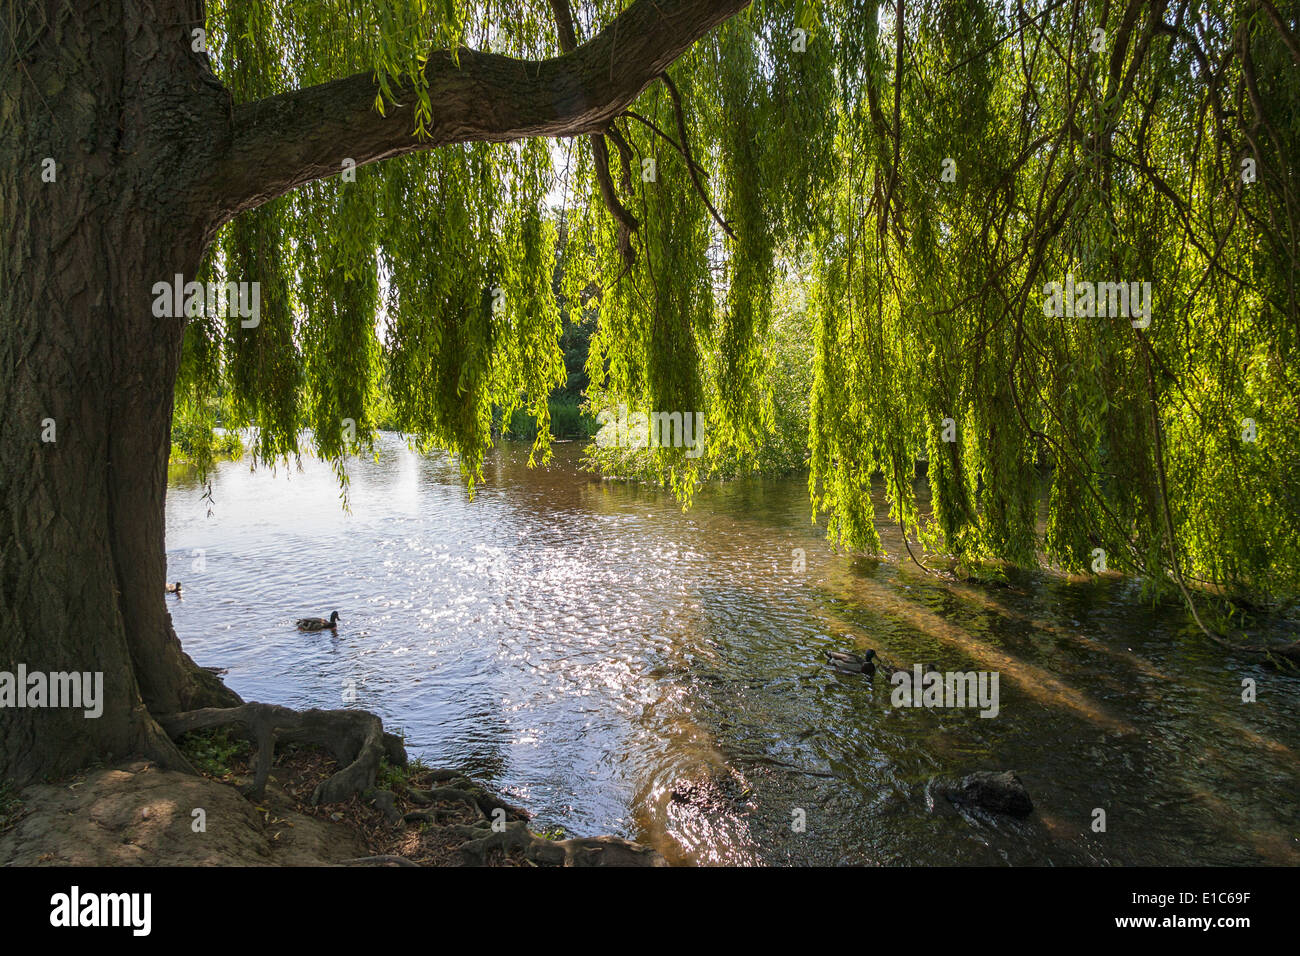 River Mole, Cobham, Surrey, England, UK with sunshine through the old Weeping Willow tree and ducks Stock Photo